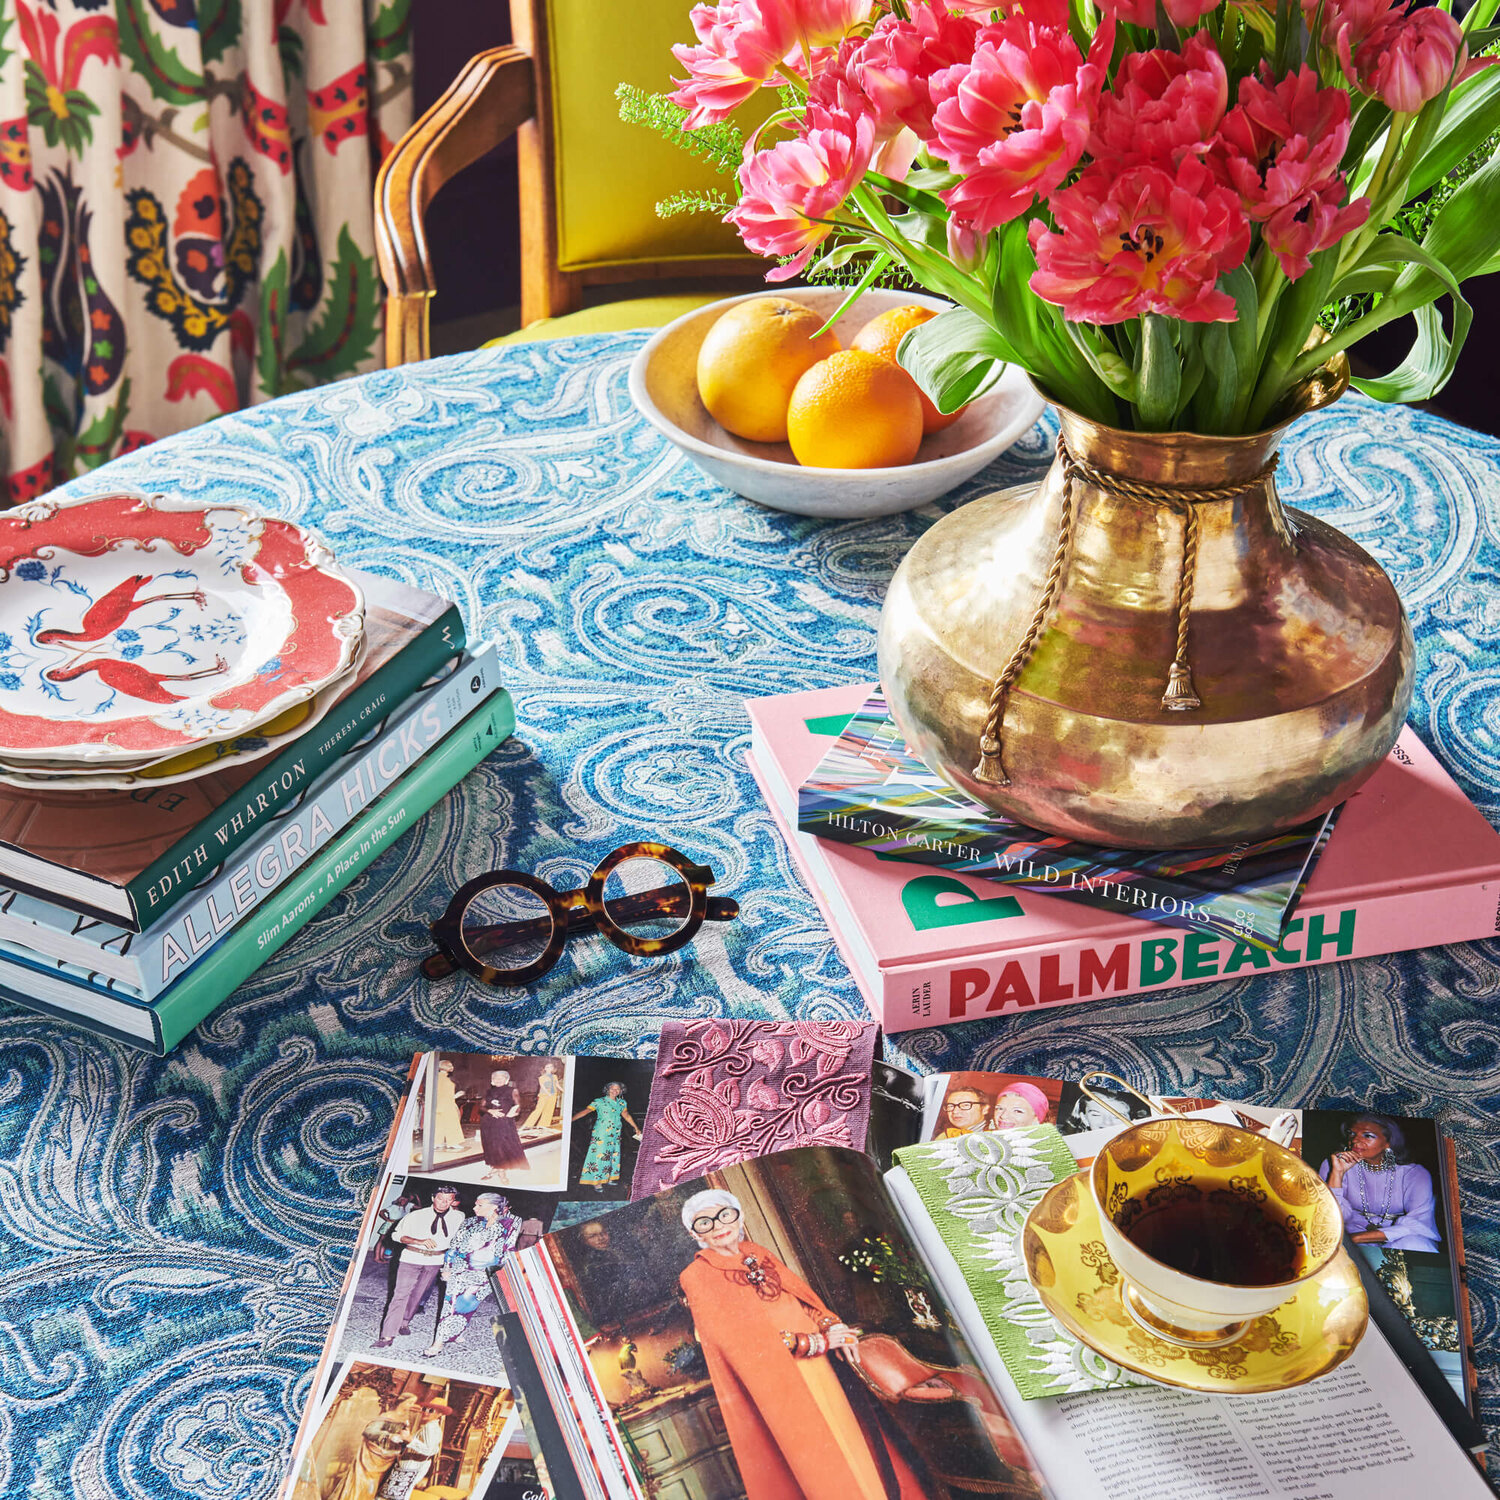 A collection of items on a table in colorful array of patterns and textures.